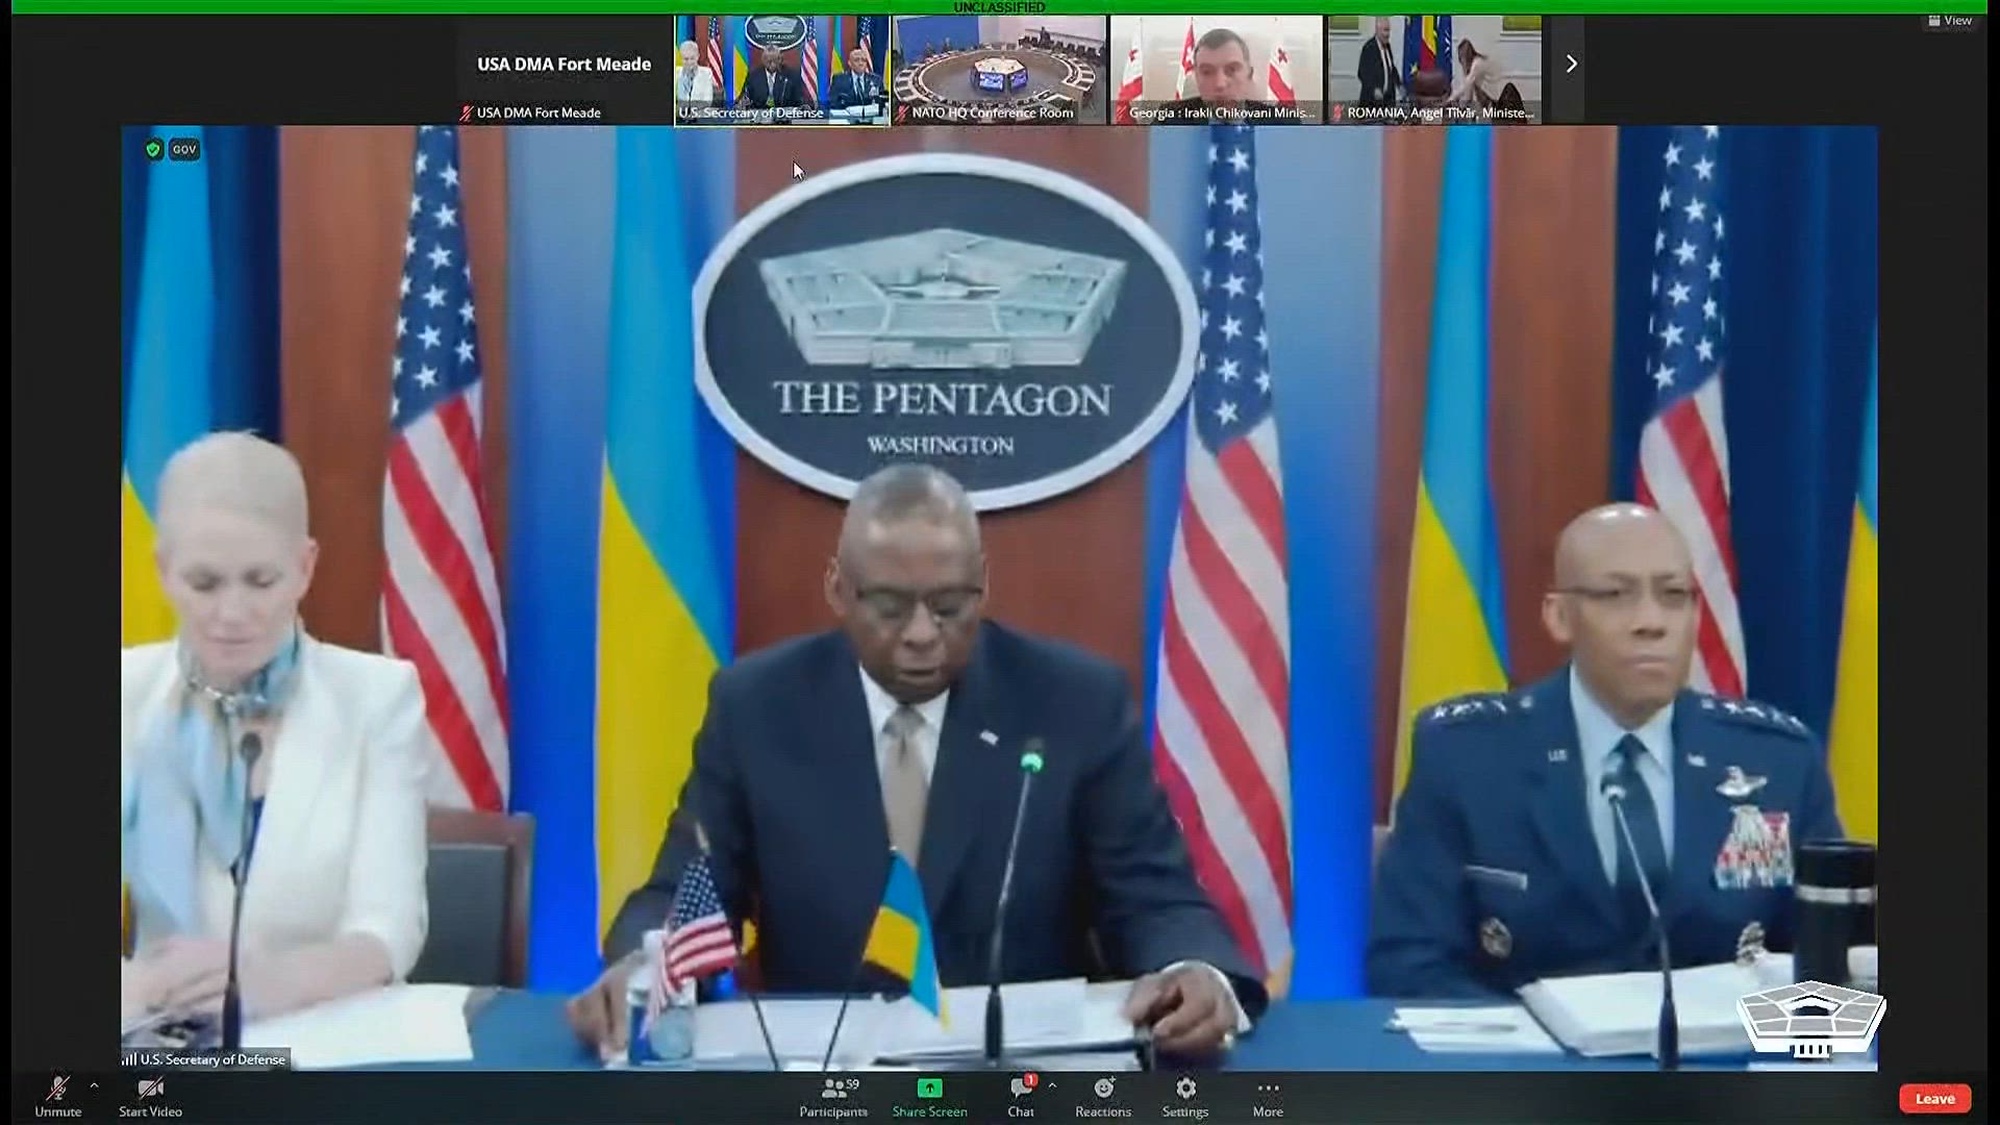 Secretary of Defense Lloyd J. Austin III gives the opening remarks at the virtual Ukraine Defense Contact Group meeting.